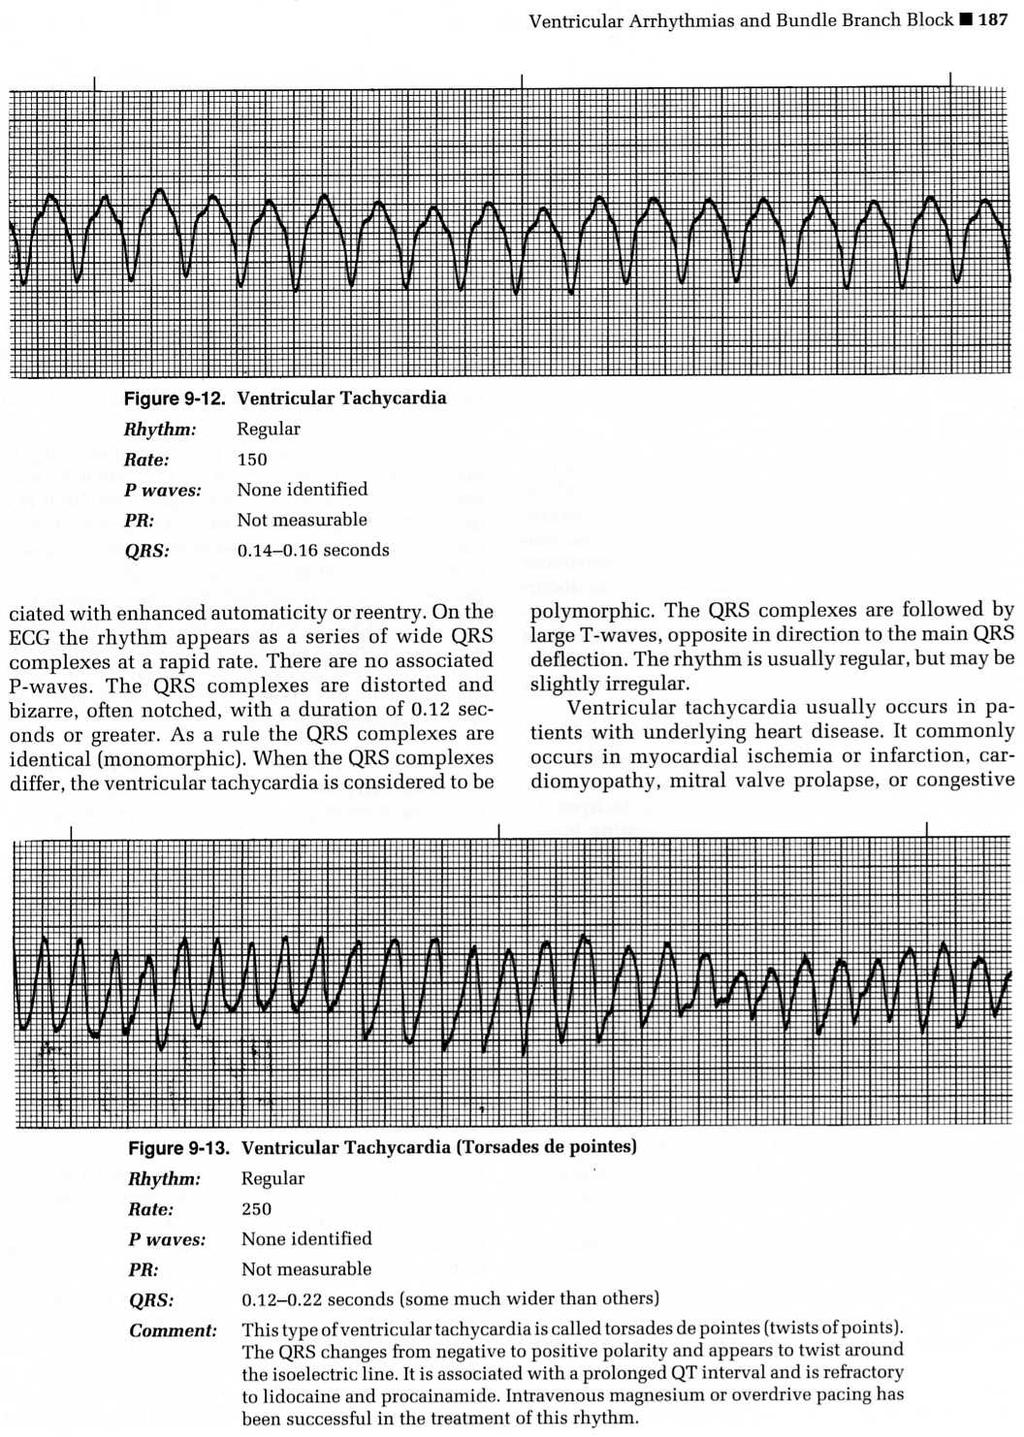 12 Lead ECG showing VT VT: 8 Steps 1. P wave: usually absent or not visible; retrograde p waves may be present. 2. Atrial rhythm: cannot be determined.